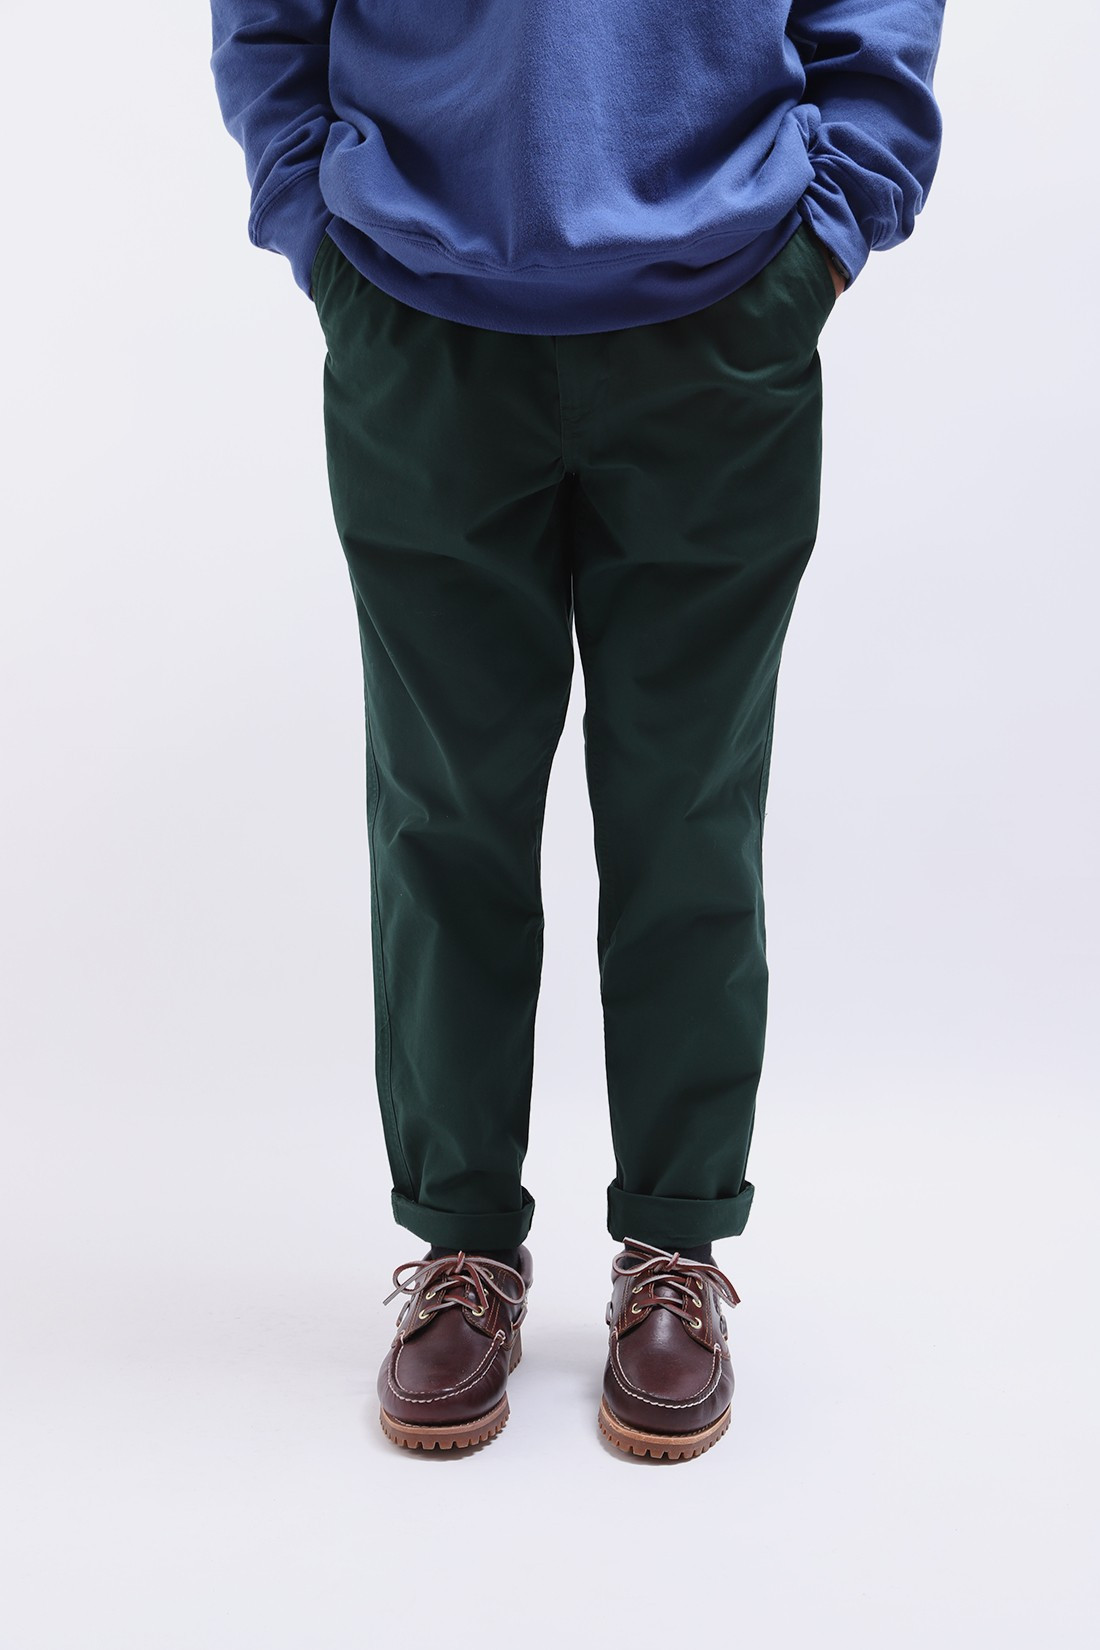 POLO RALPH LAUREN / Relaxed fit prepster pant College green